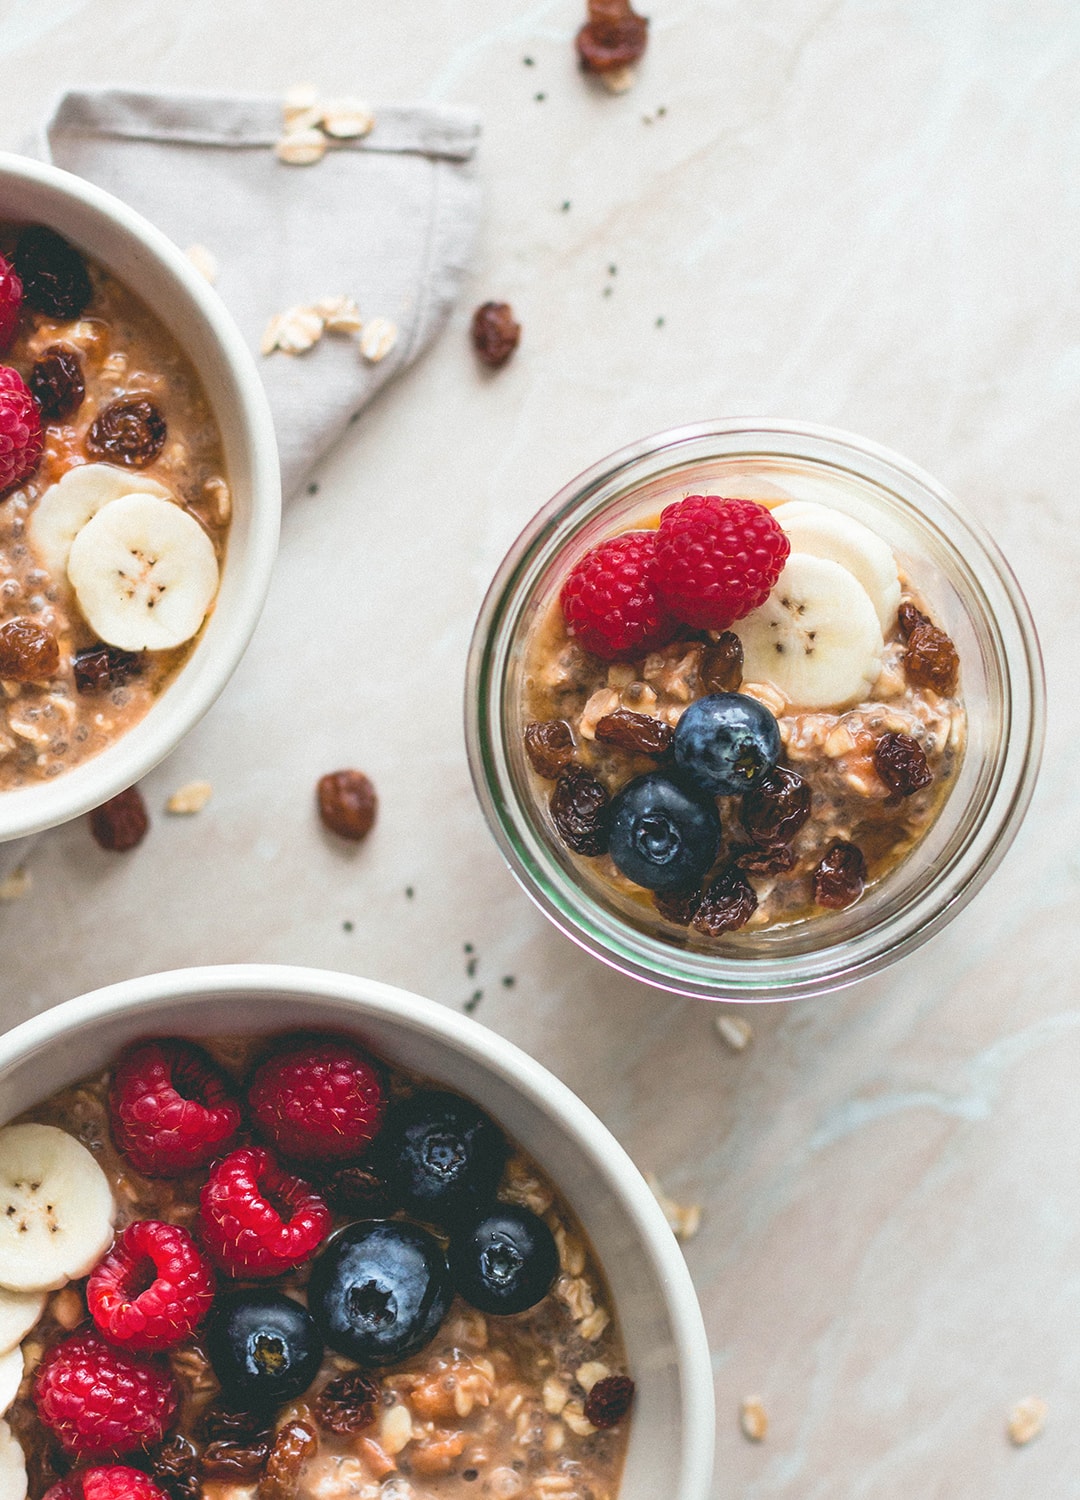 21 Oatmeal Recipes You Need To Try (vegan, gluten-free) - every flavor you can think of! With chocolate, berries, tropical fruit, chia seeds, acai, superfoods, spices, and remakes of famous desserts! Made with oats, buckwheat, or quinoa. Delicious! | thehealthfulideas.com